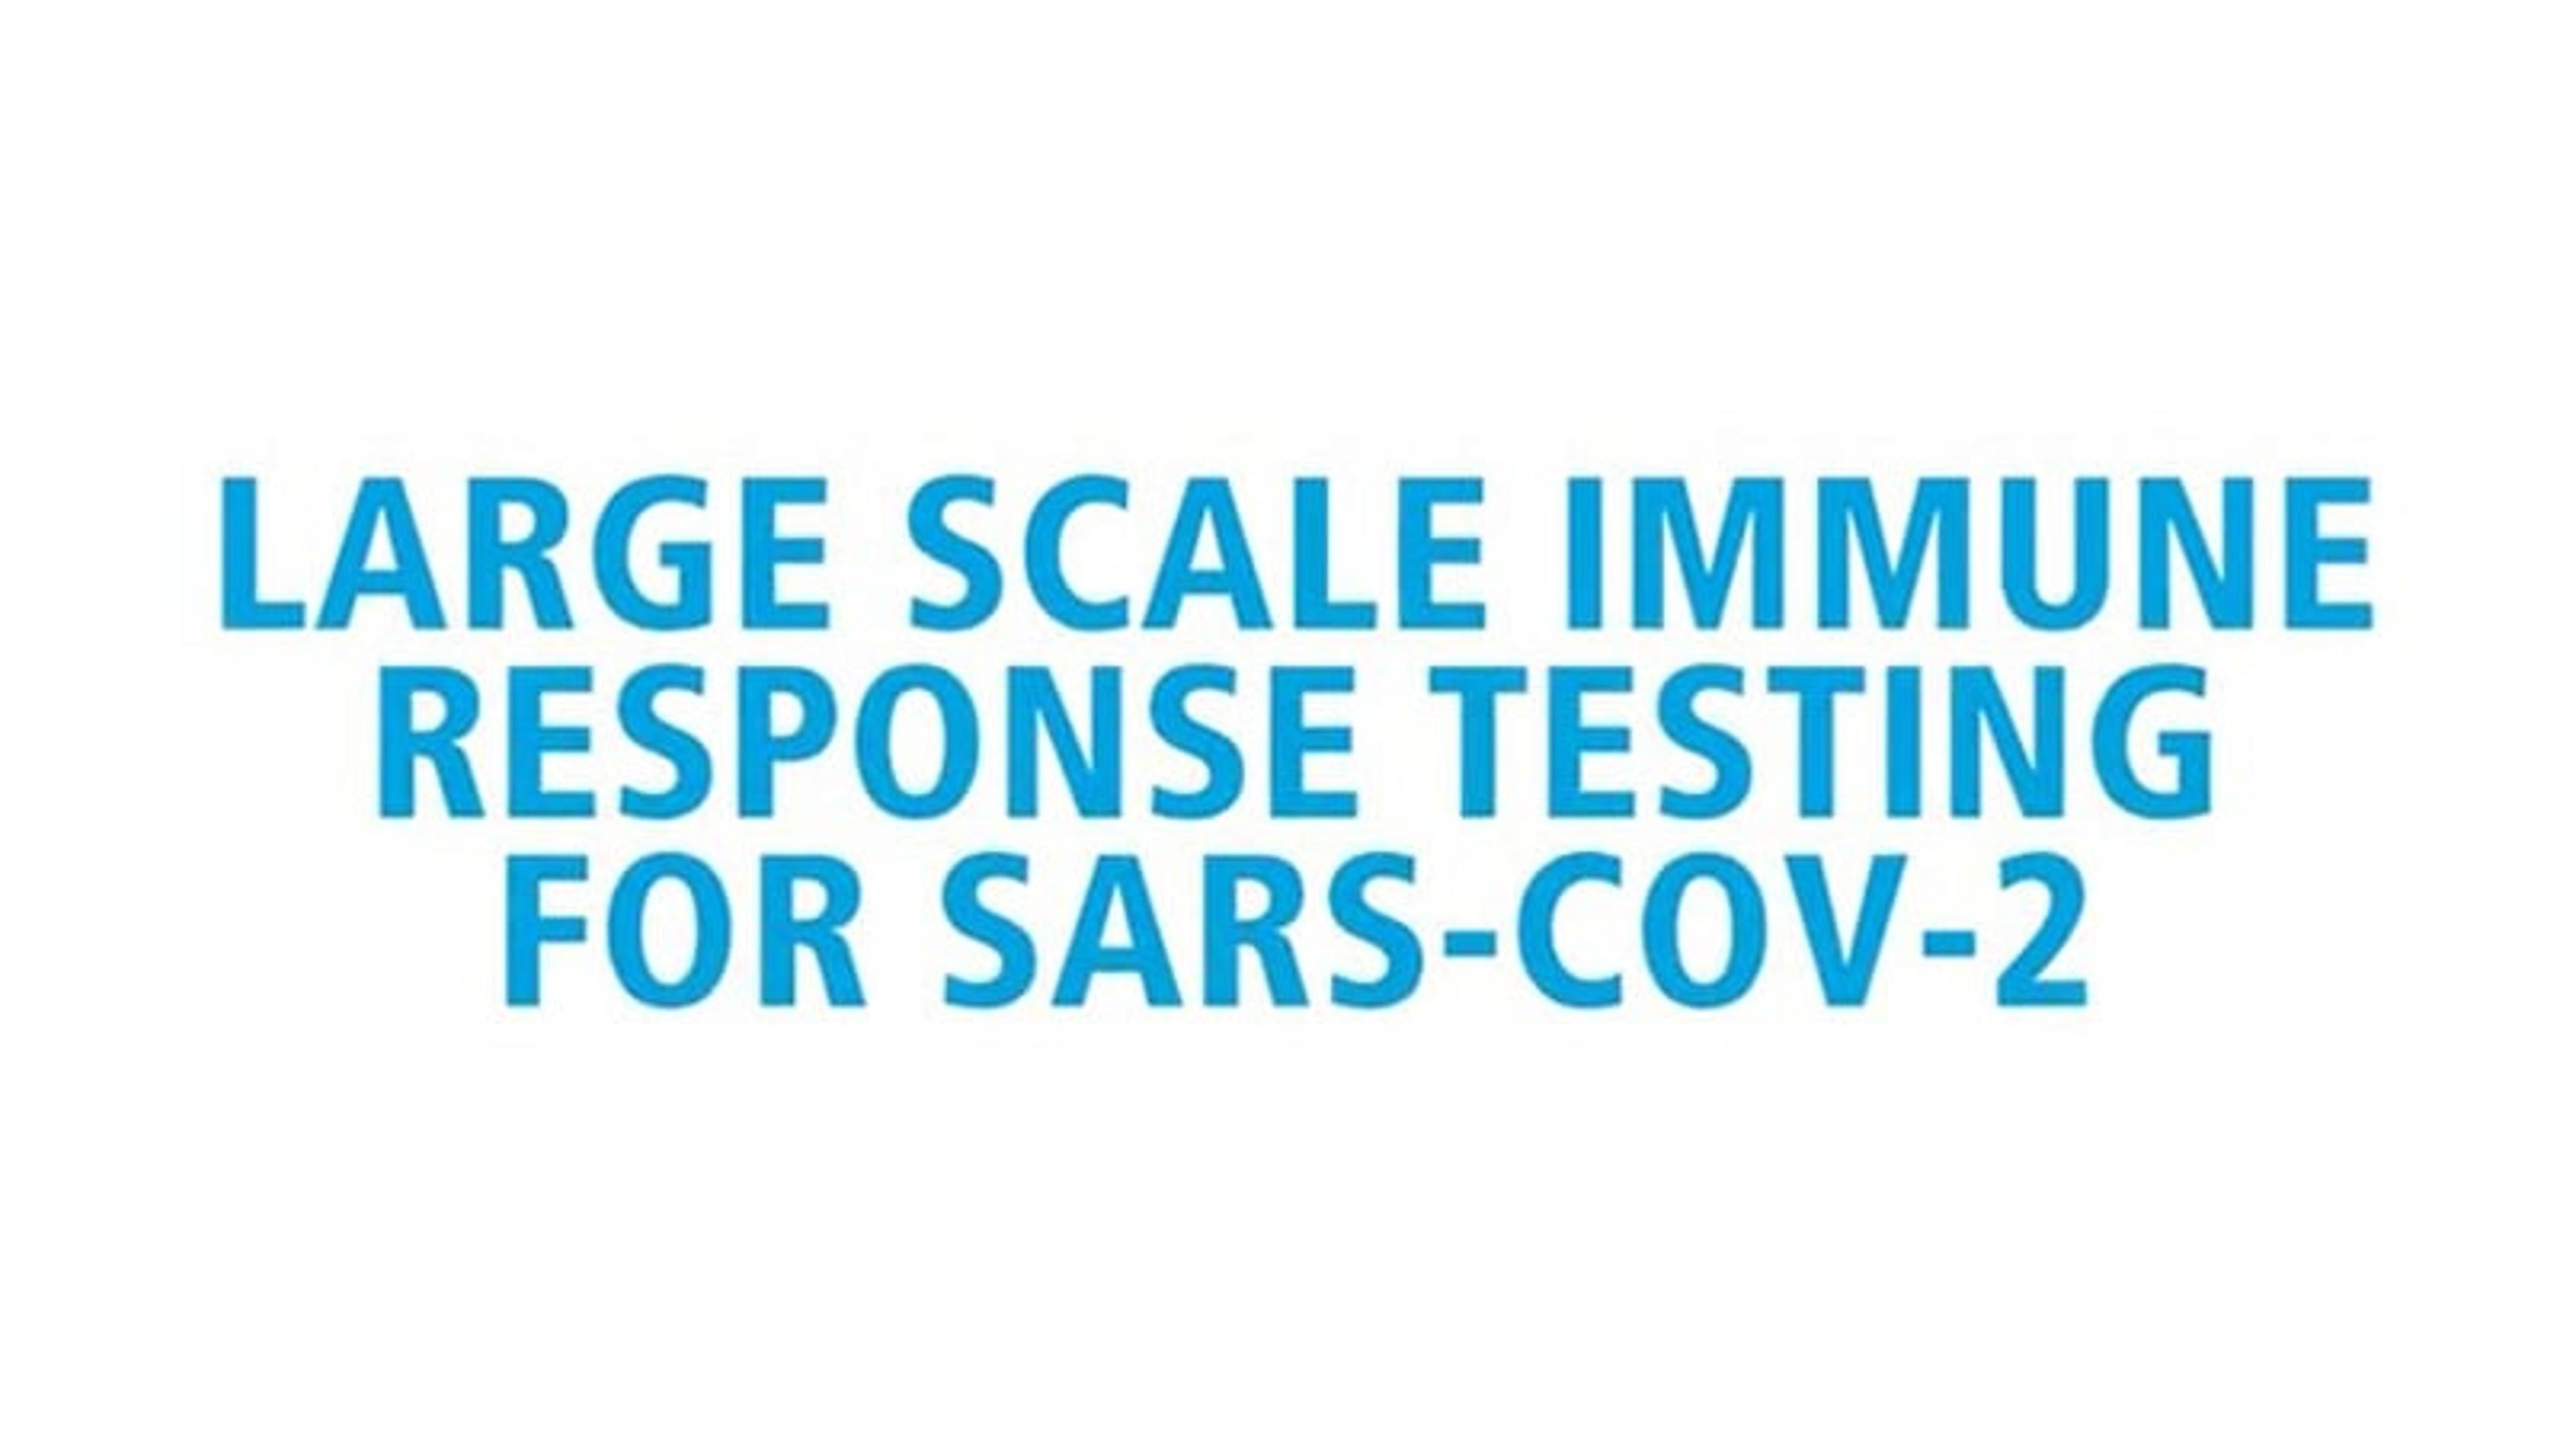 Large-scale COVID-19 immune response testing with dried blood spot testing